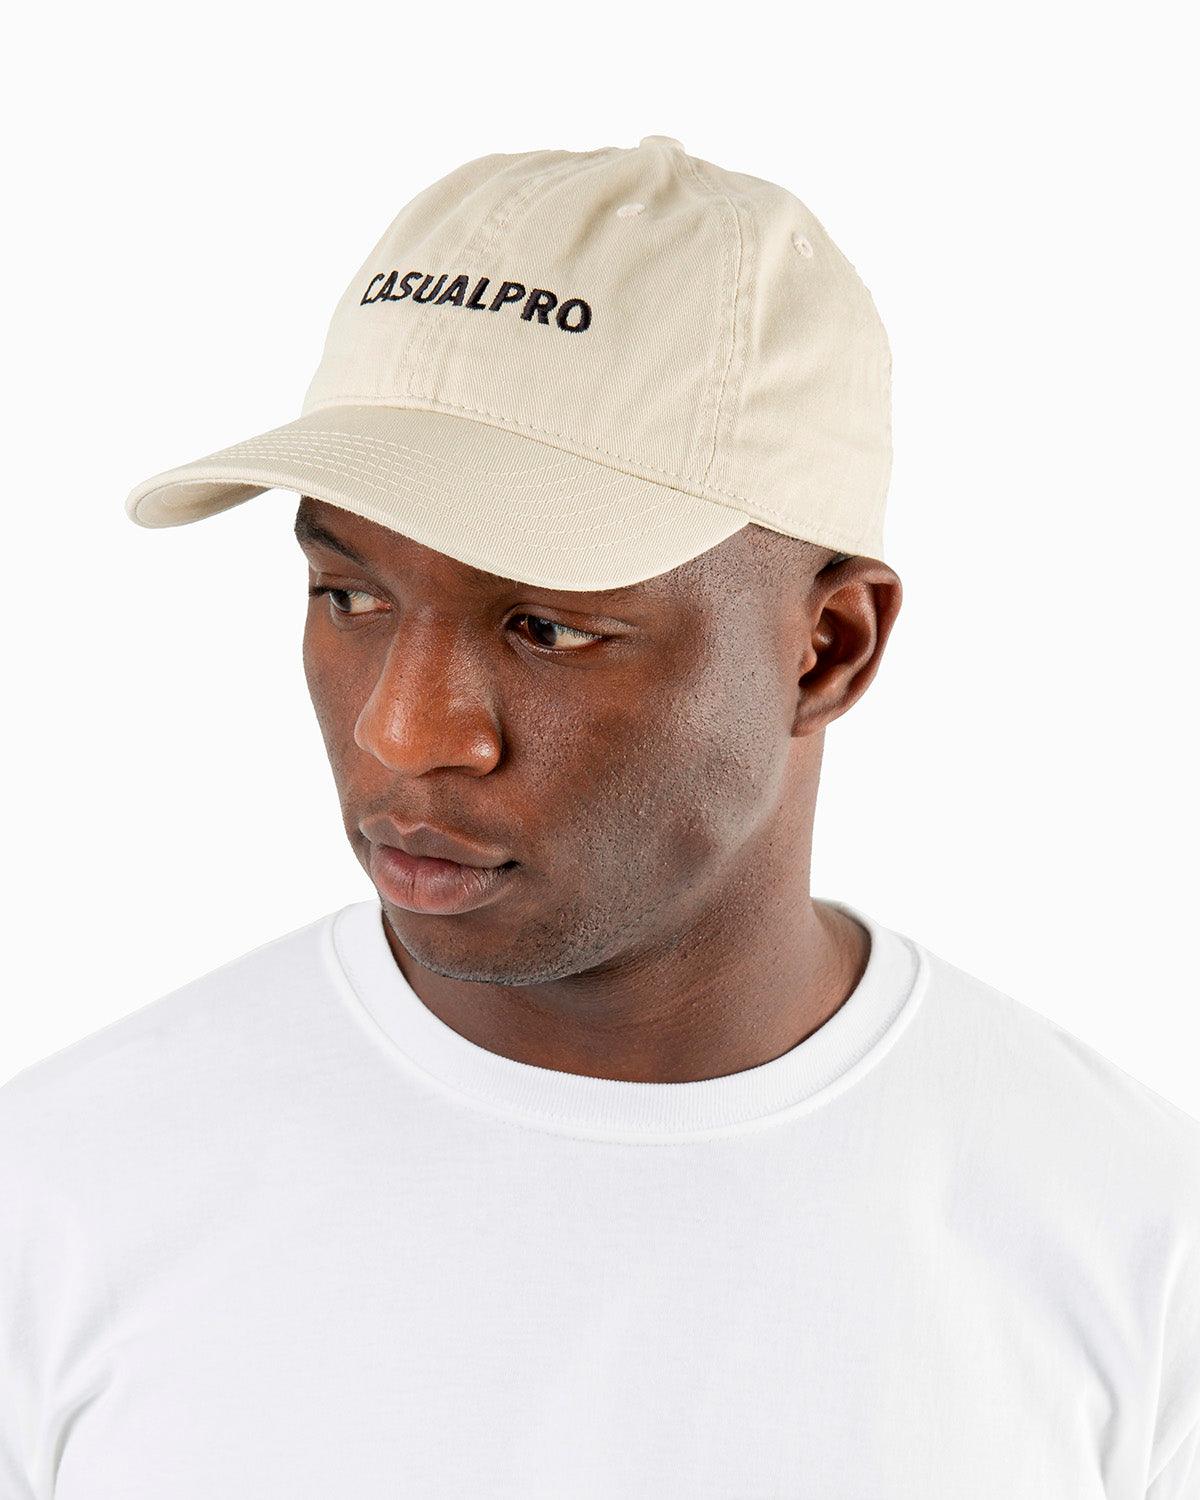 Man wearing a beige dad hat in organic cotton, 6 panel hat, low profile, embroidered logo